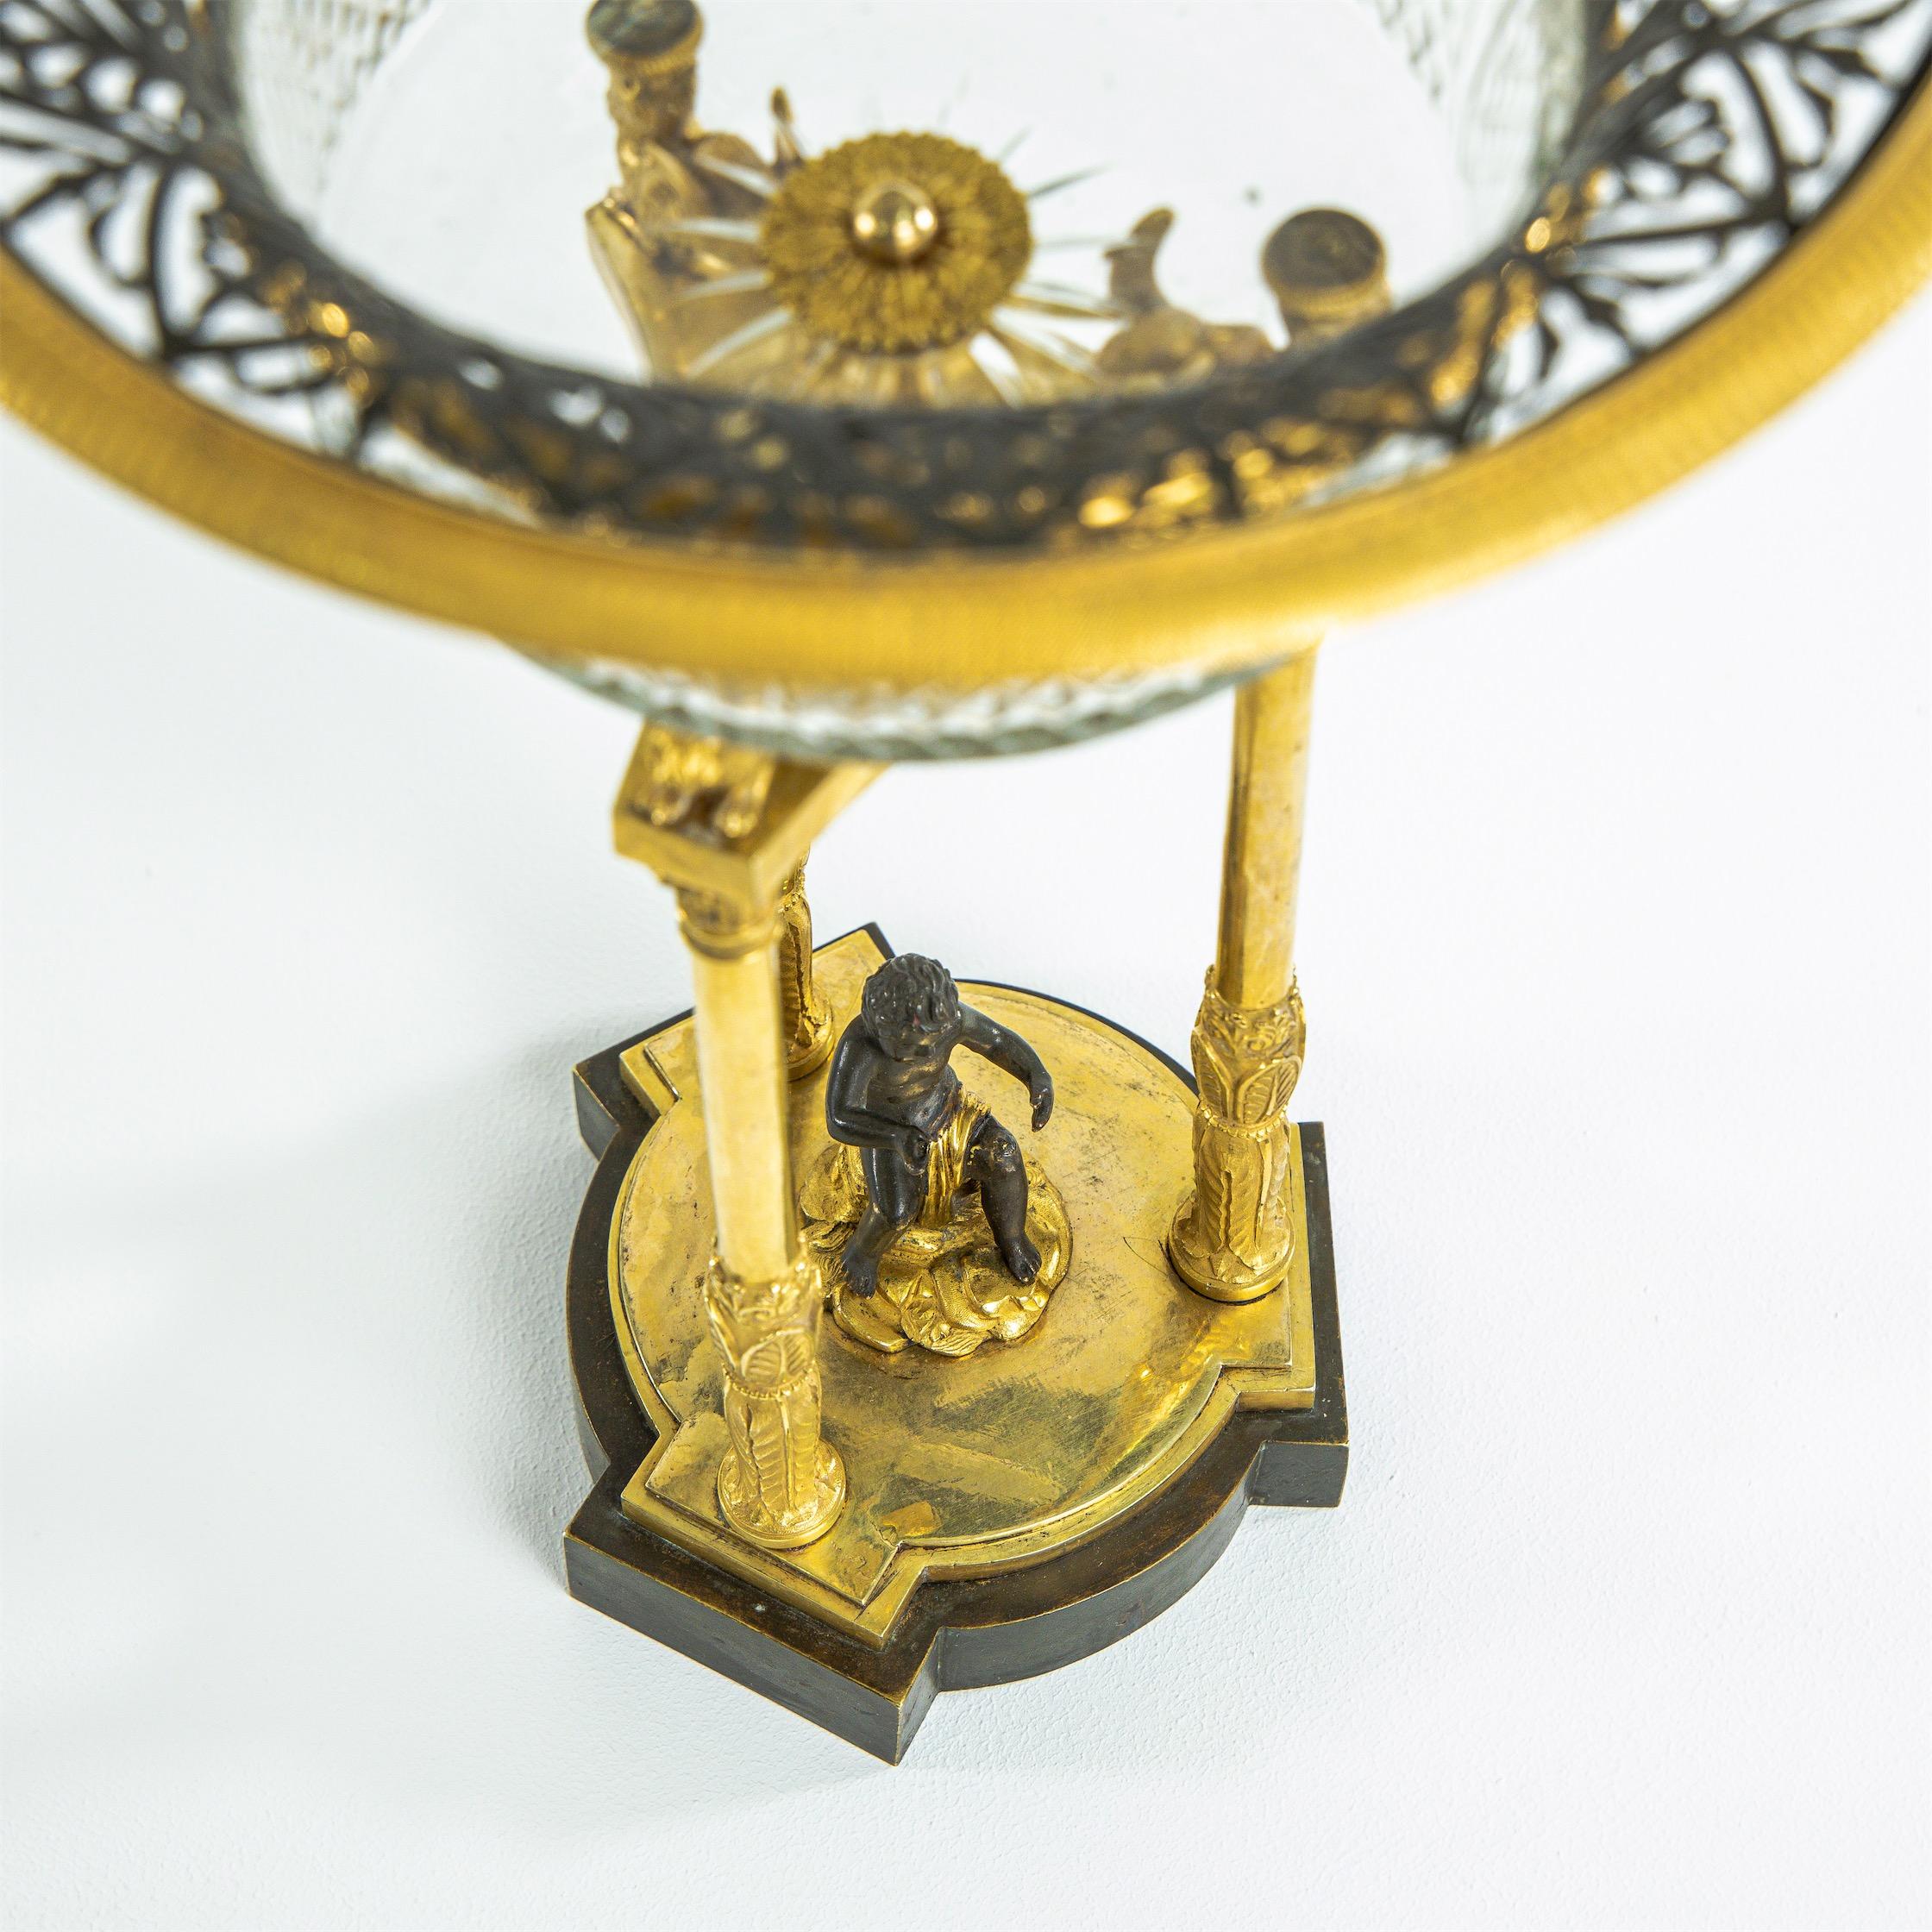 Empire Centerpiece with Putto Decor, Bronze and Glass, Early 19th Century For Sale 2